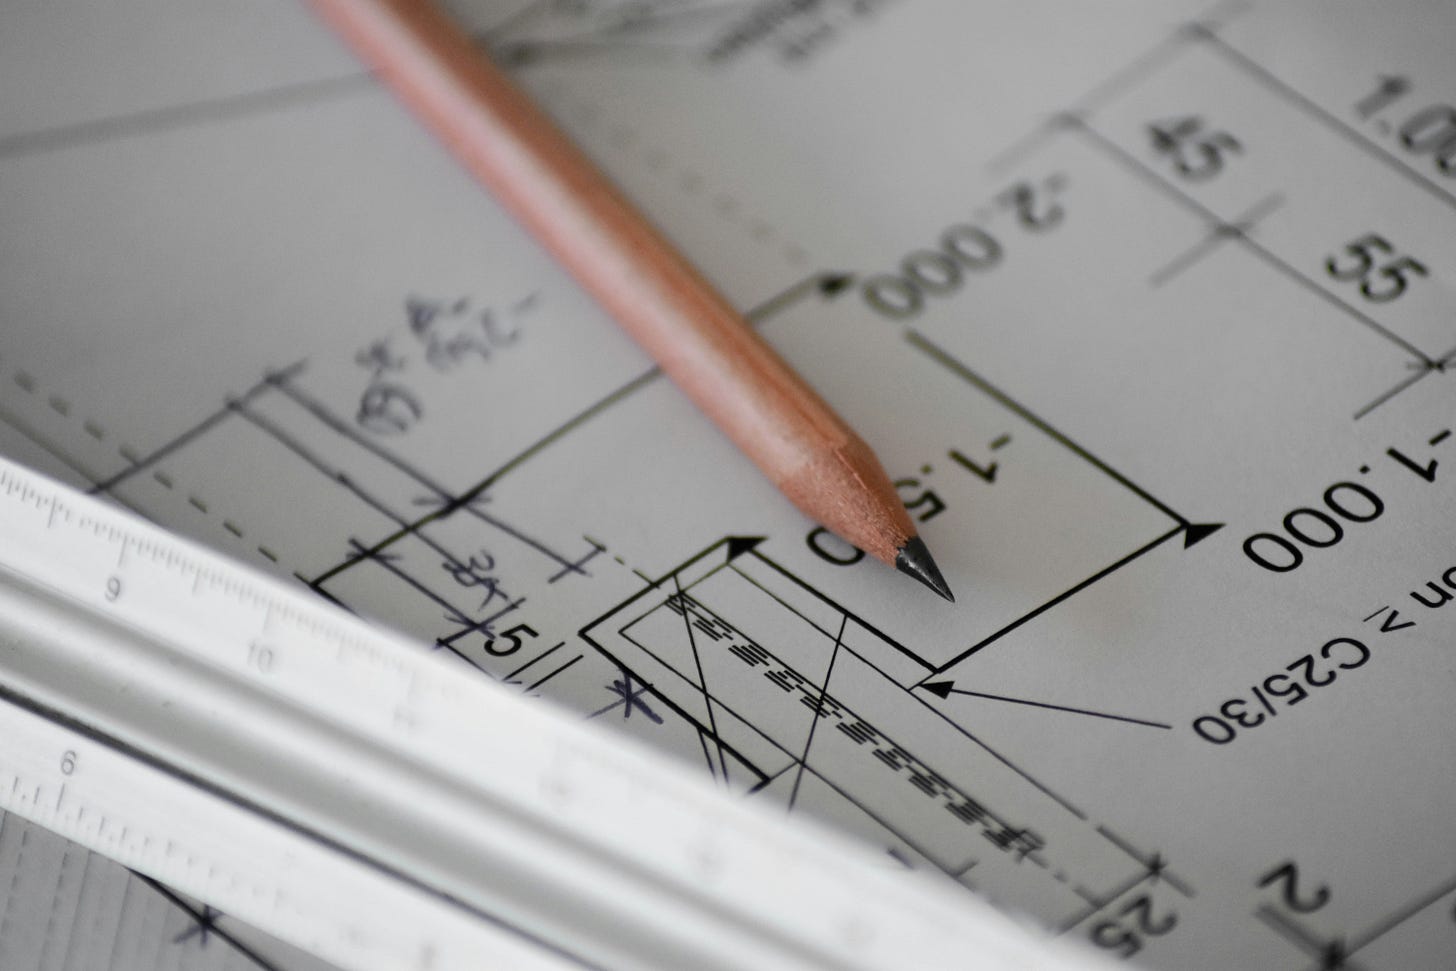 Image of pencil laying on top of drafting plans.